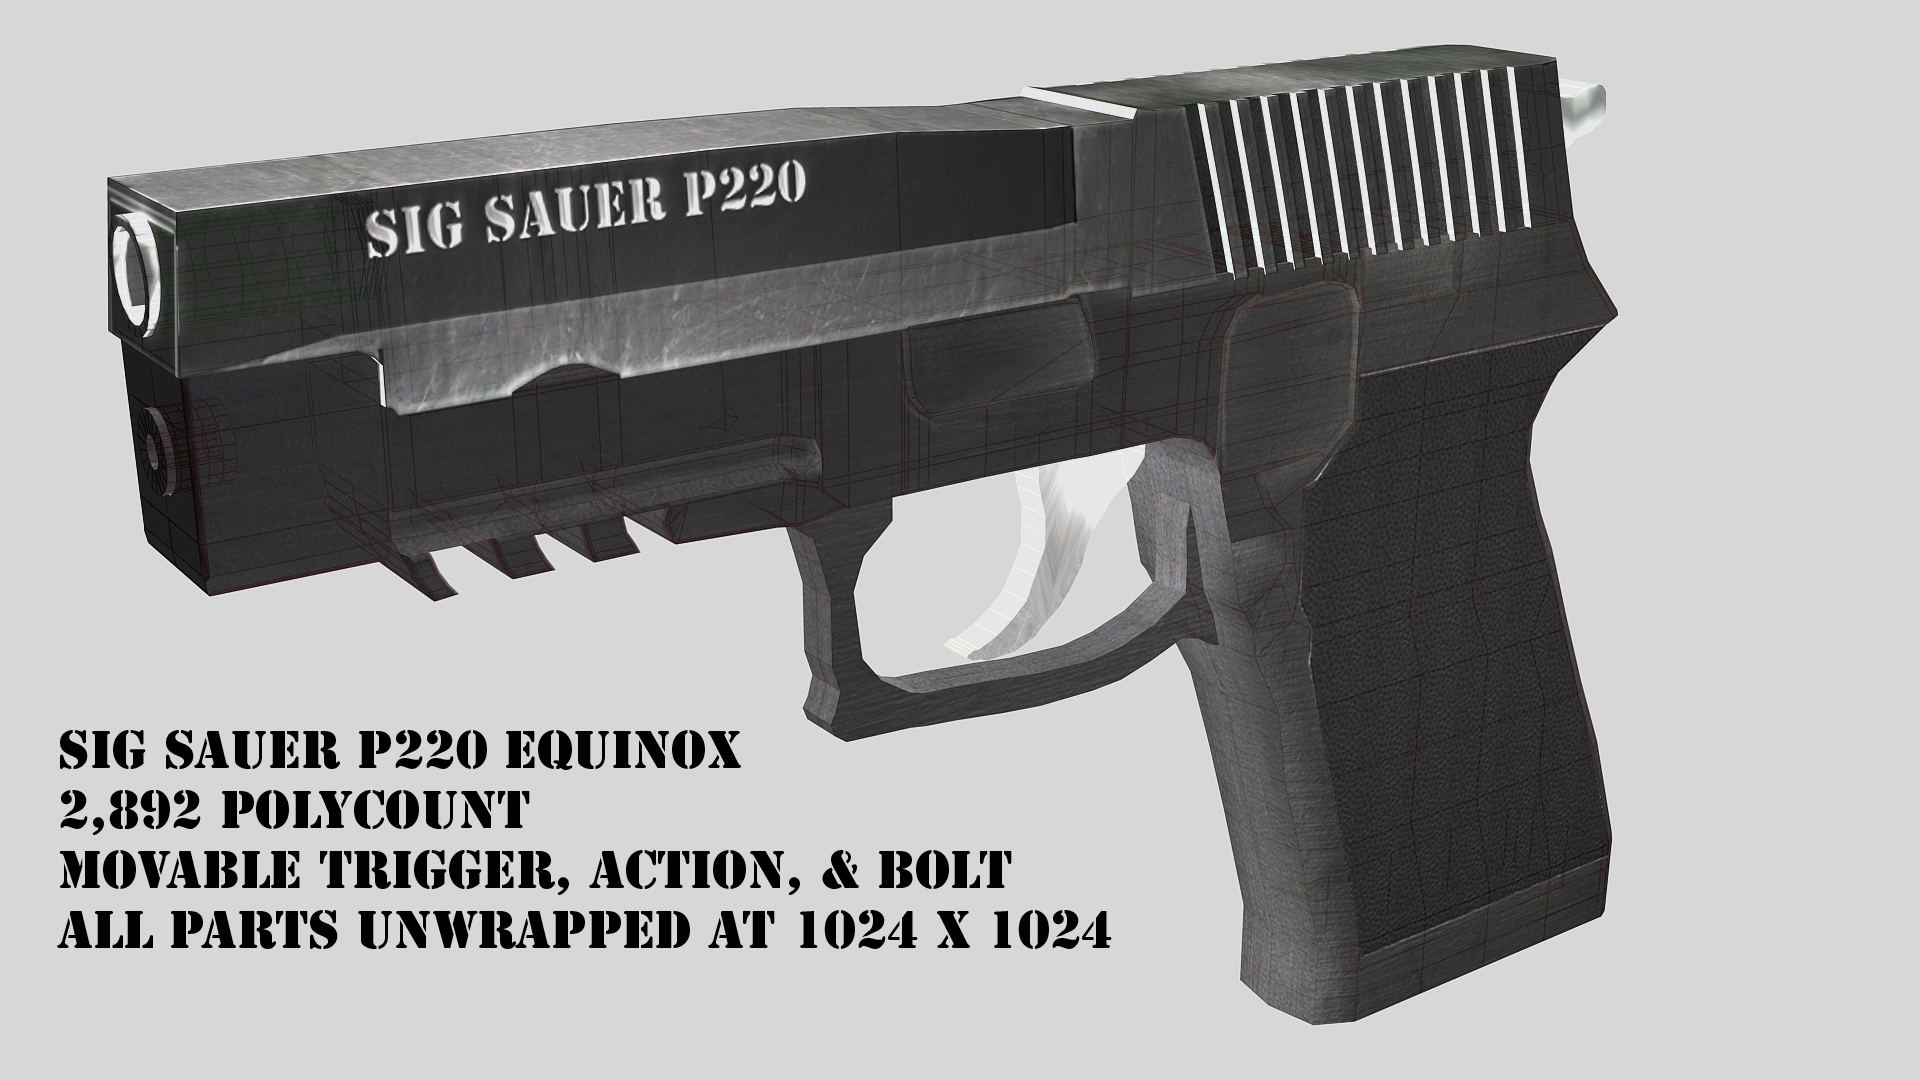 Sig Sauer P220 Equinox By Ghost12332